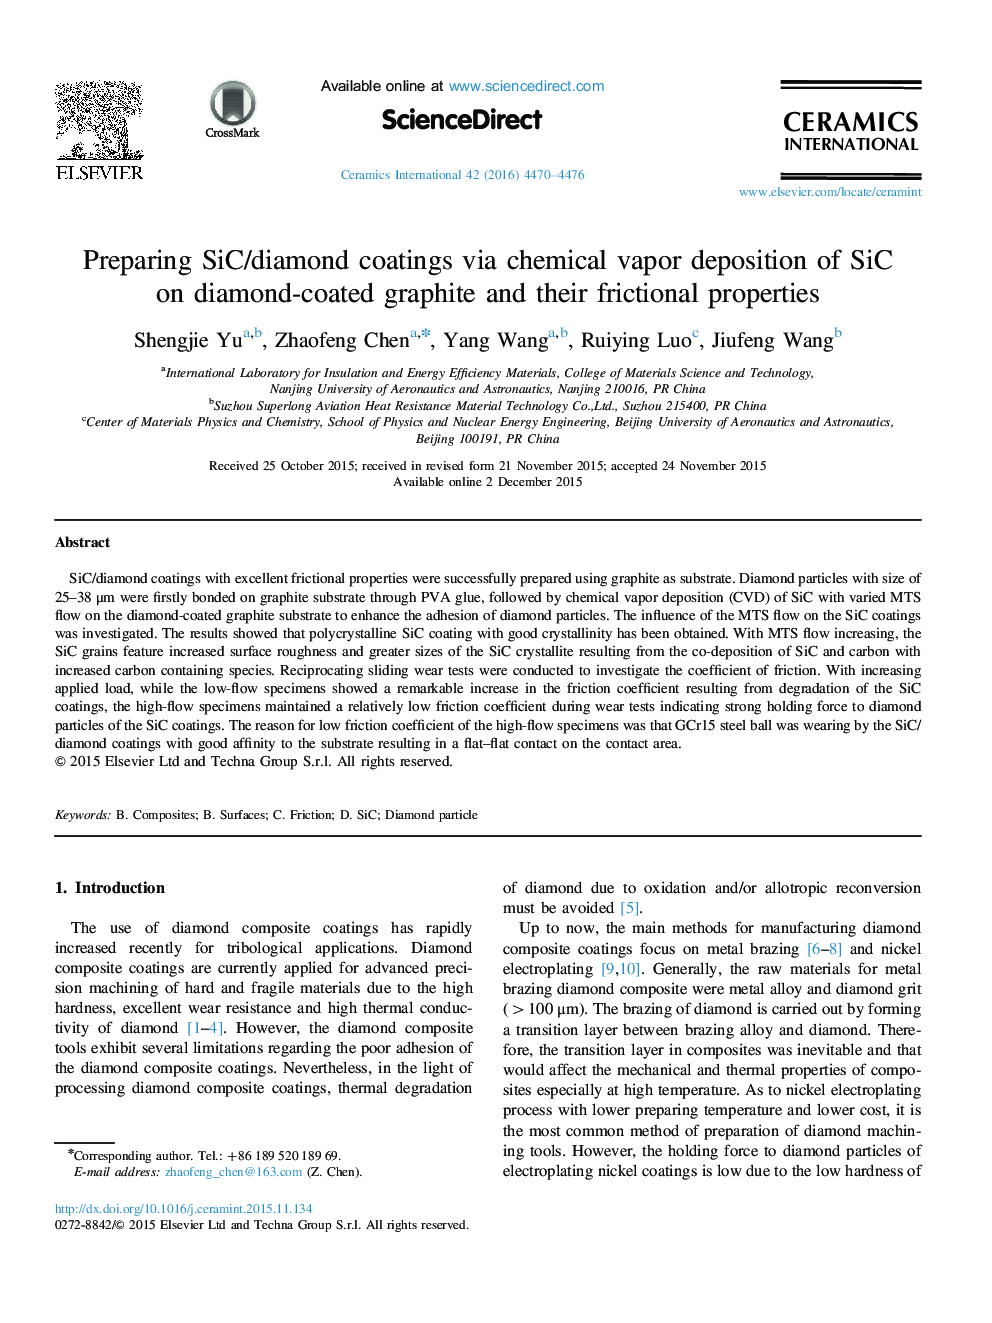 Preparing SiC/diamond coatings via chemical vapor deposition of SiC on diamond-coated graphite and their frictional properties